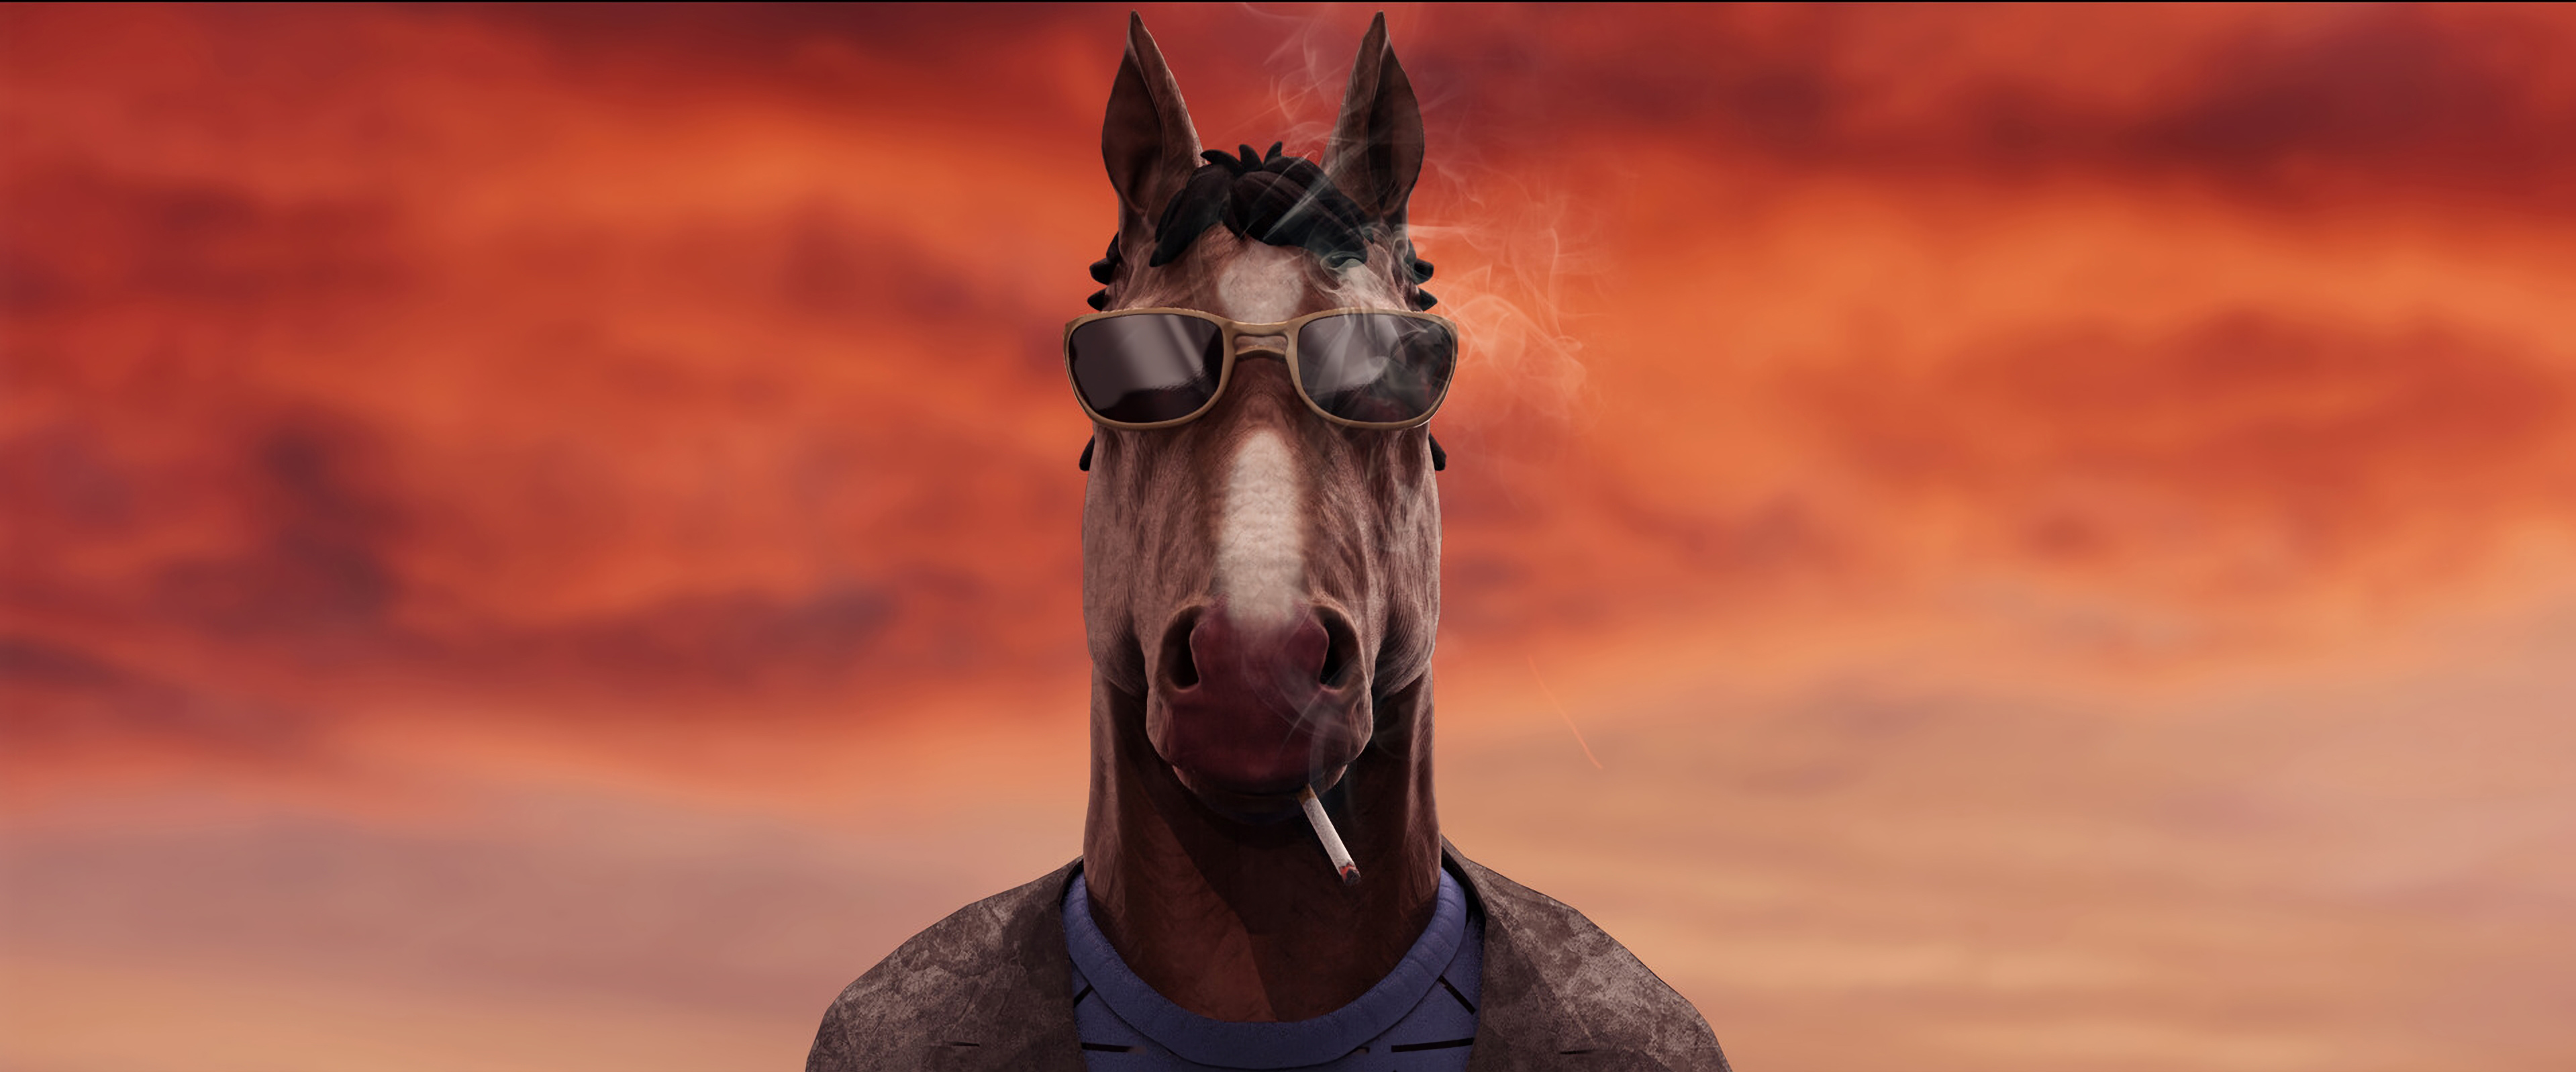 Brutal horse with glasses